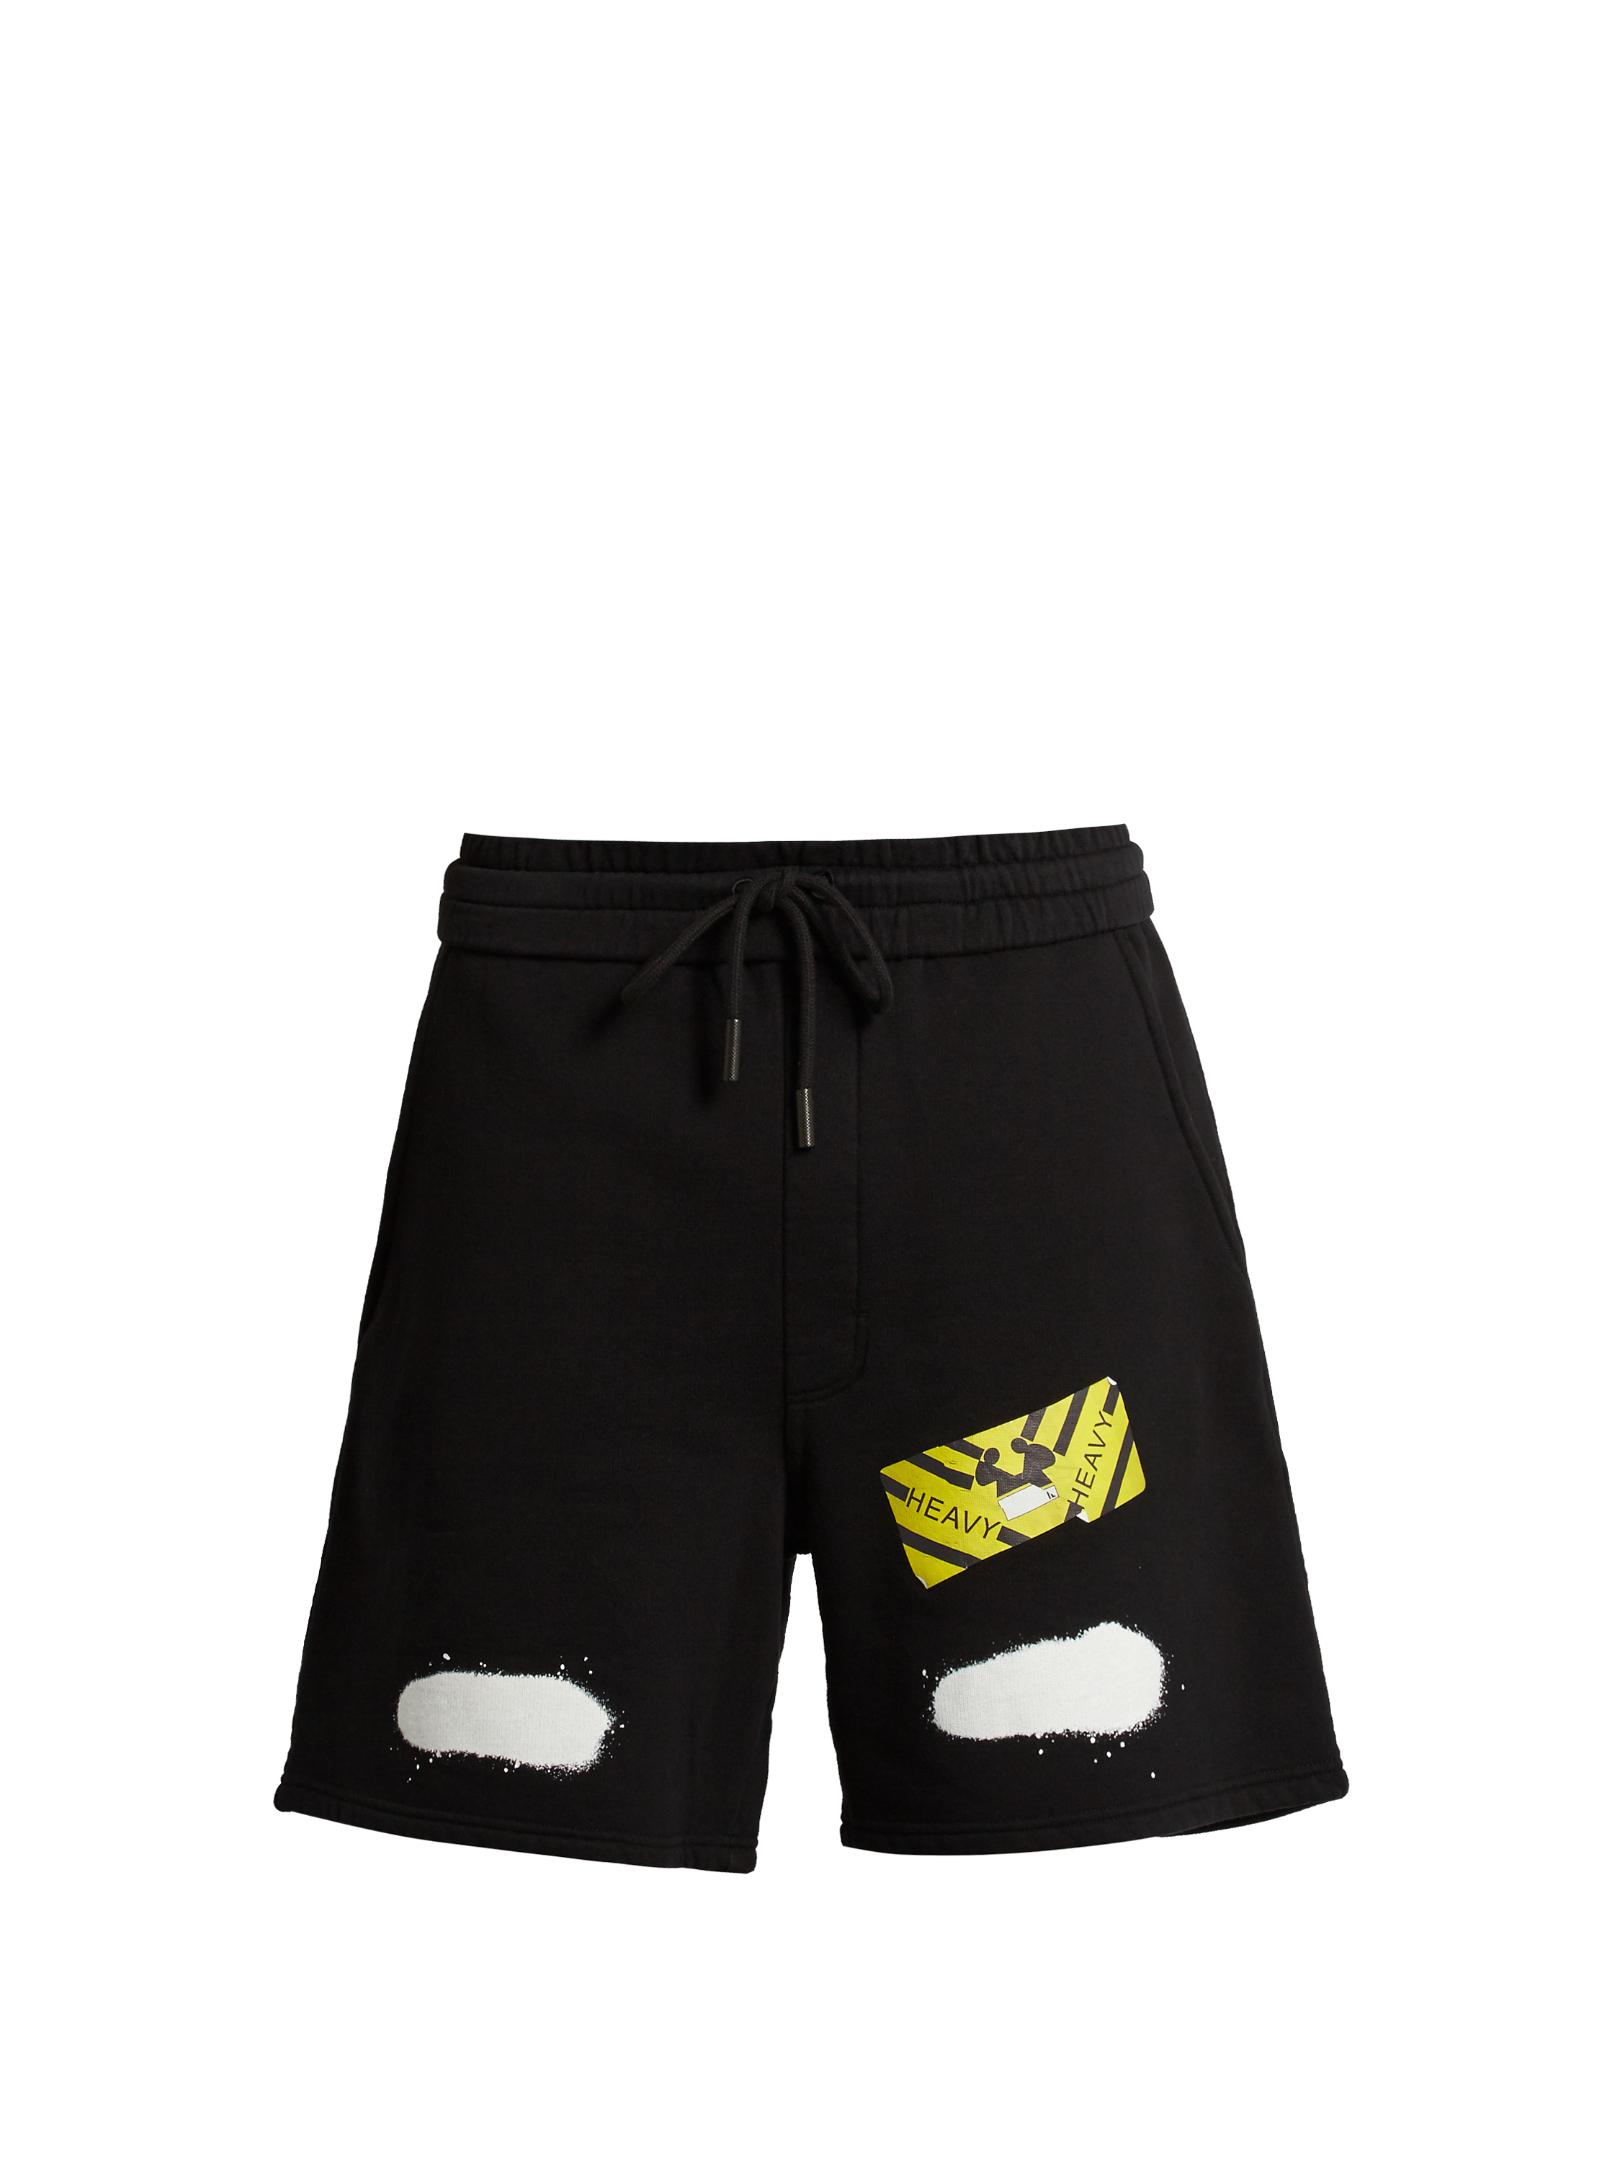 Off-White c/o Virgil Abloh Spray-paint Print Cotton-jersey Shorts in Black  for Men - Lyst